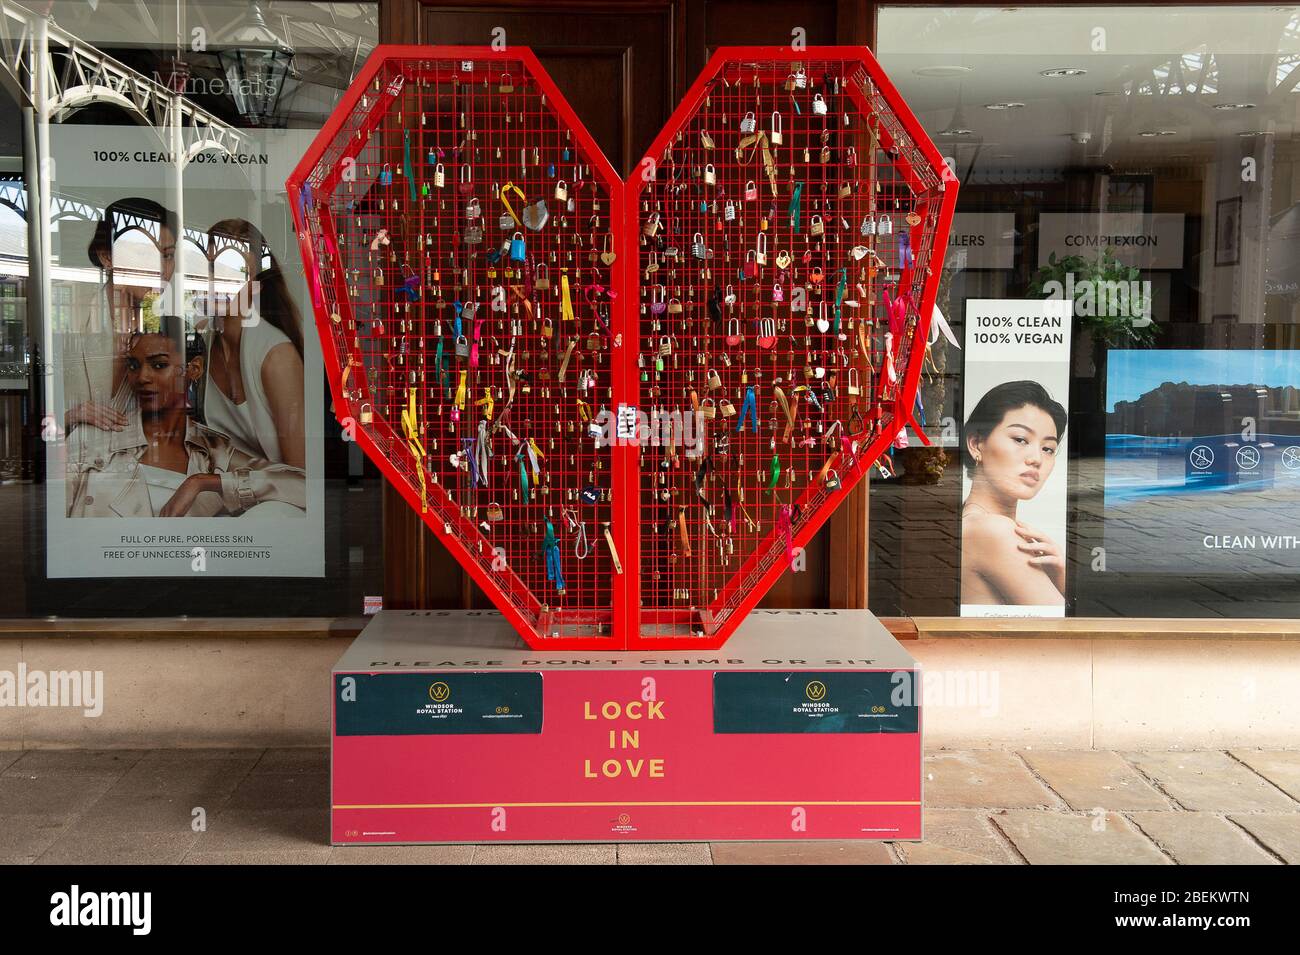 Windsor, UK. 13th Apr, 2020. A sign of hope and love as people lock padlocks onto a large heart shaped metal stand 'Lock in Love' at Windsor Royal Station Shopping Centre in Windsor. Credit: Maureen McLean/Alamy Stock Photo